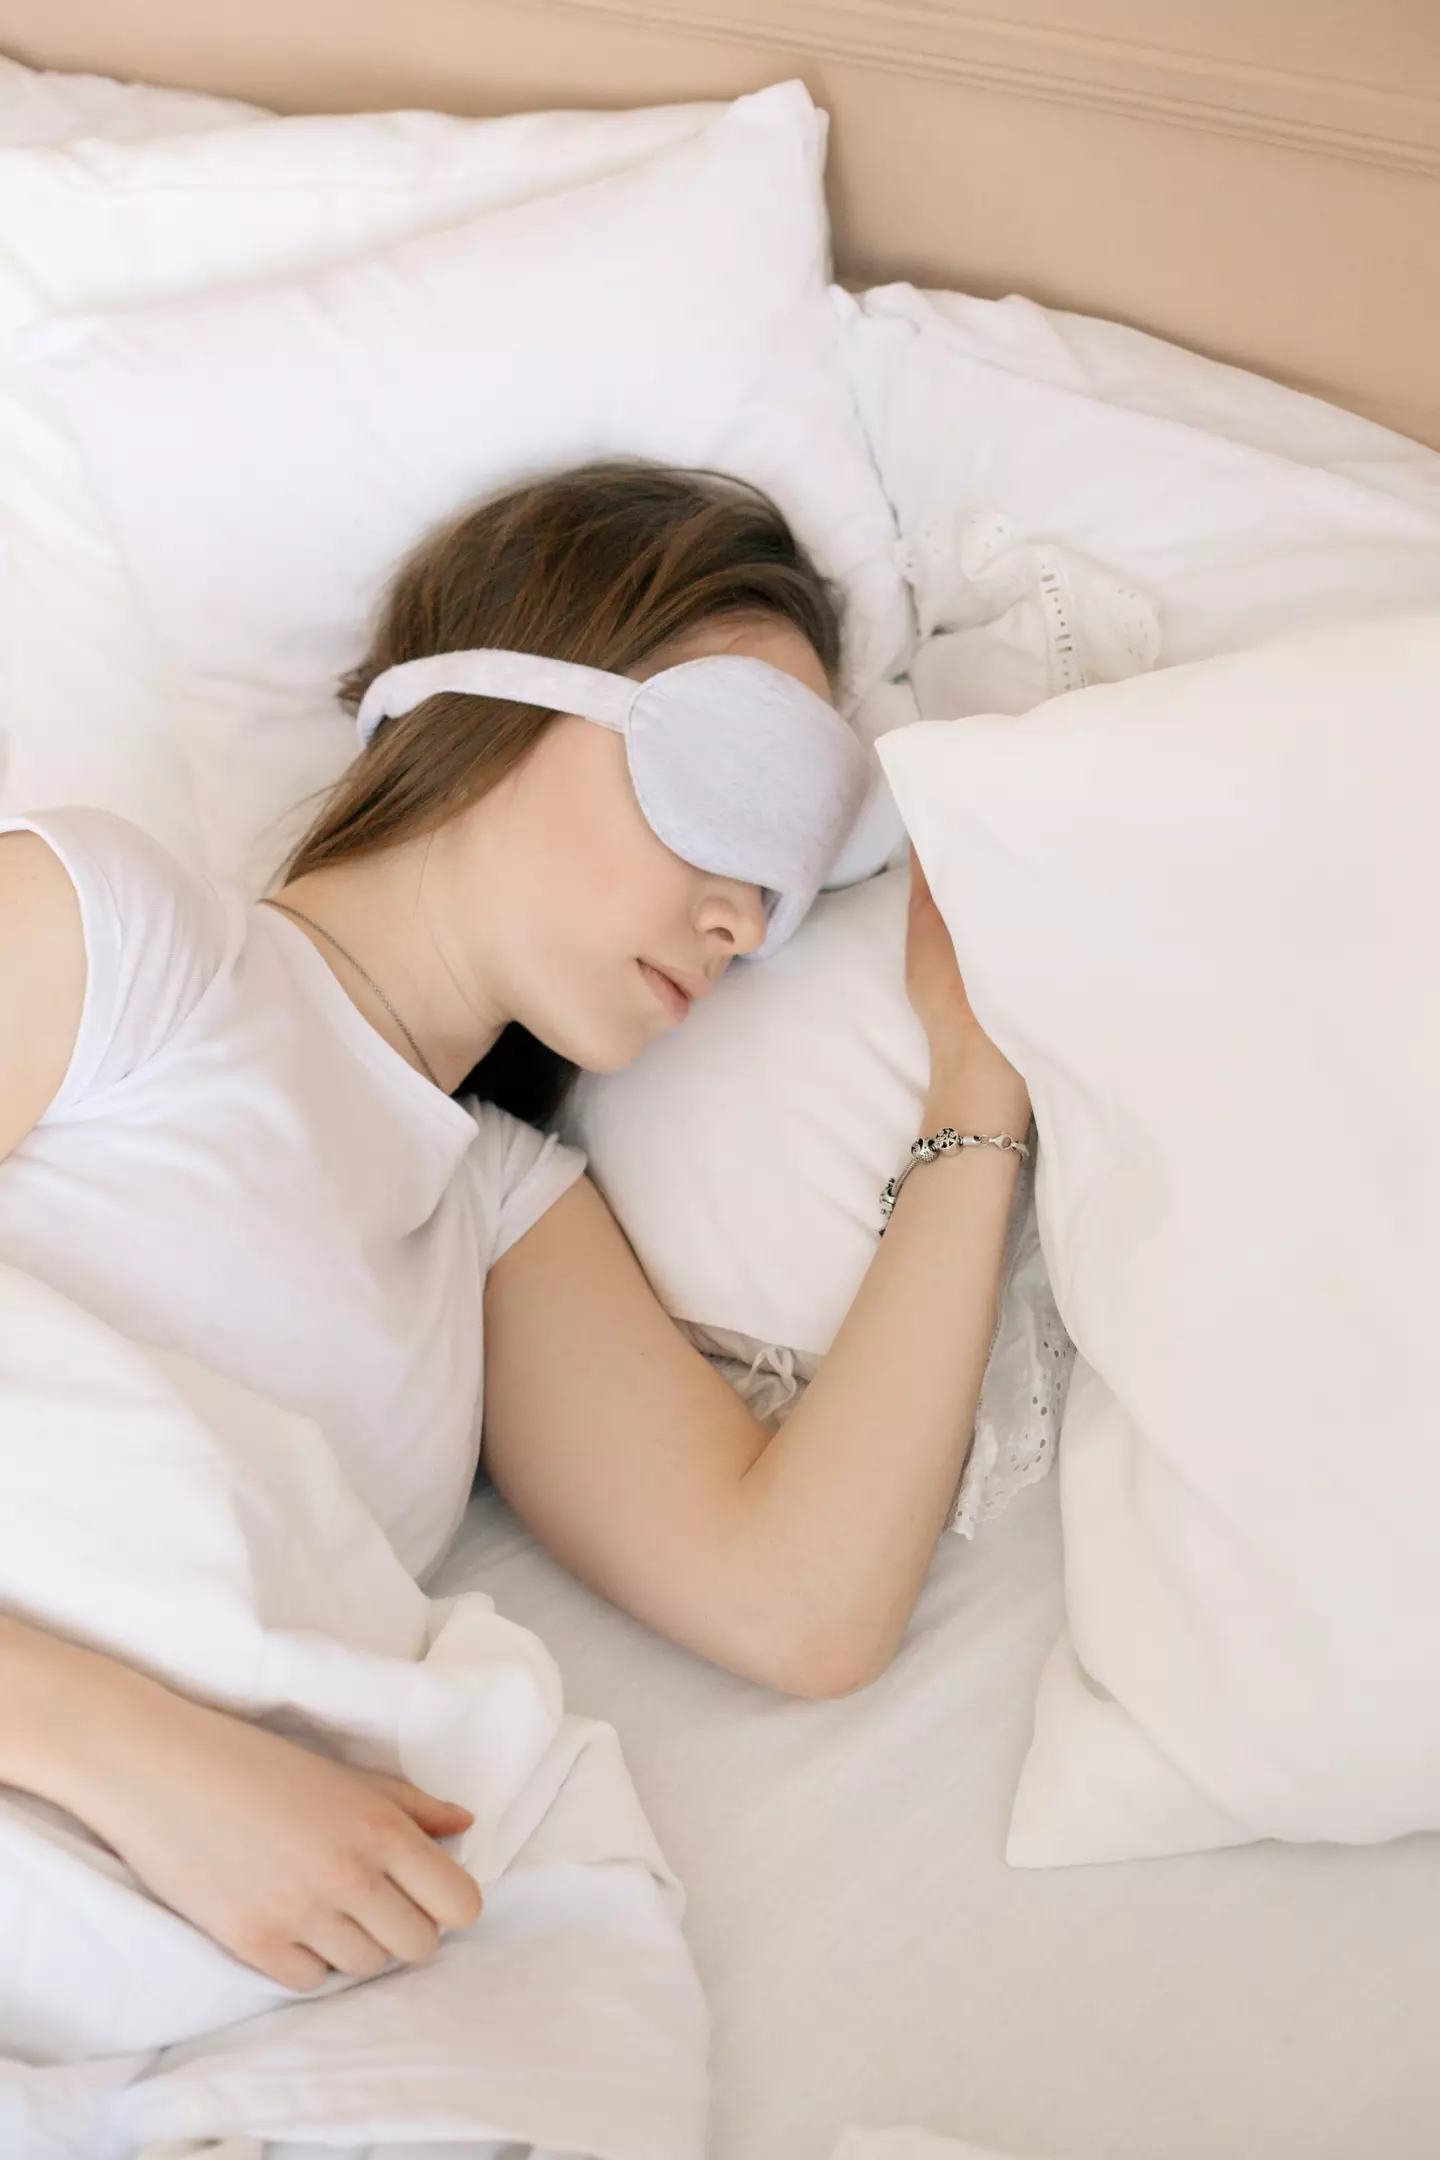 Brown noise is being praised by the ADHD community for relaxing the mind and helping sleep.